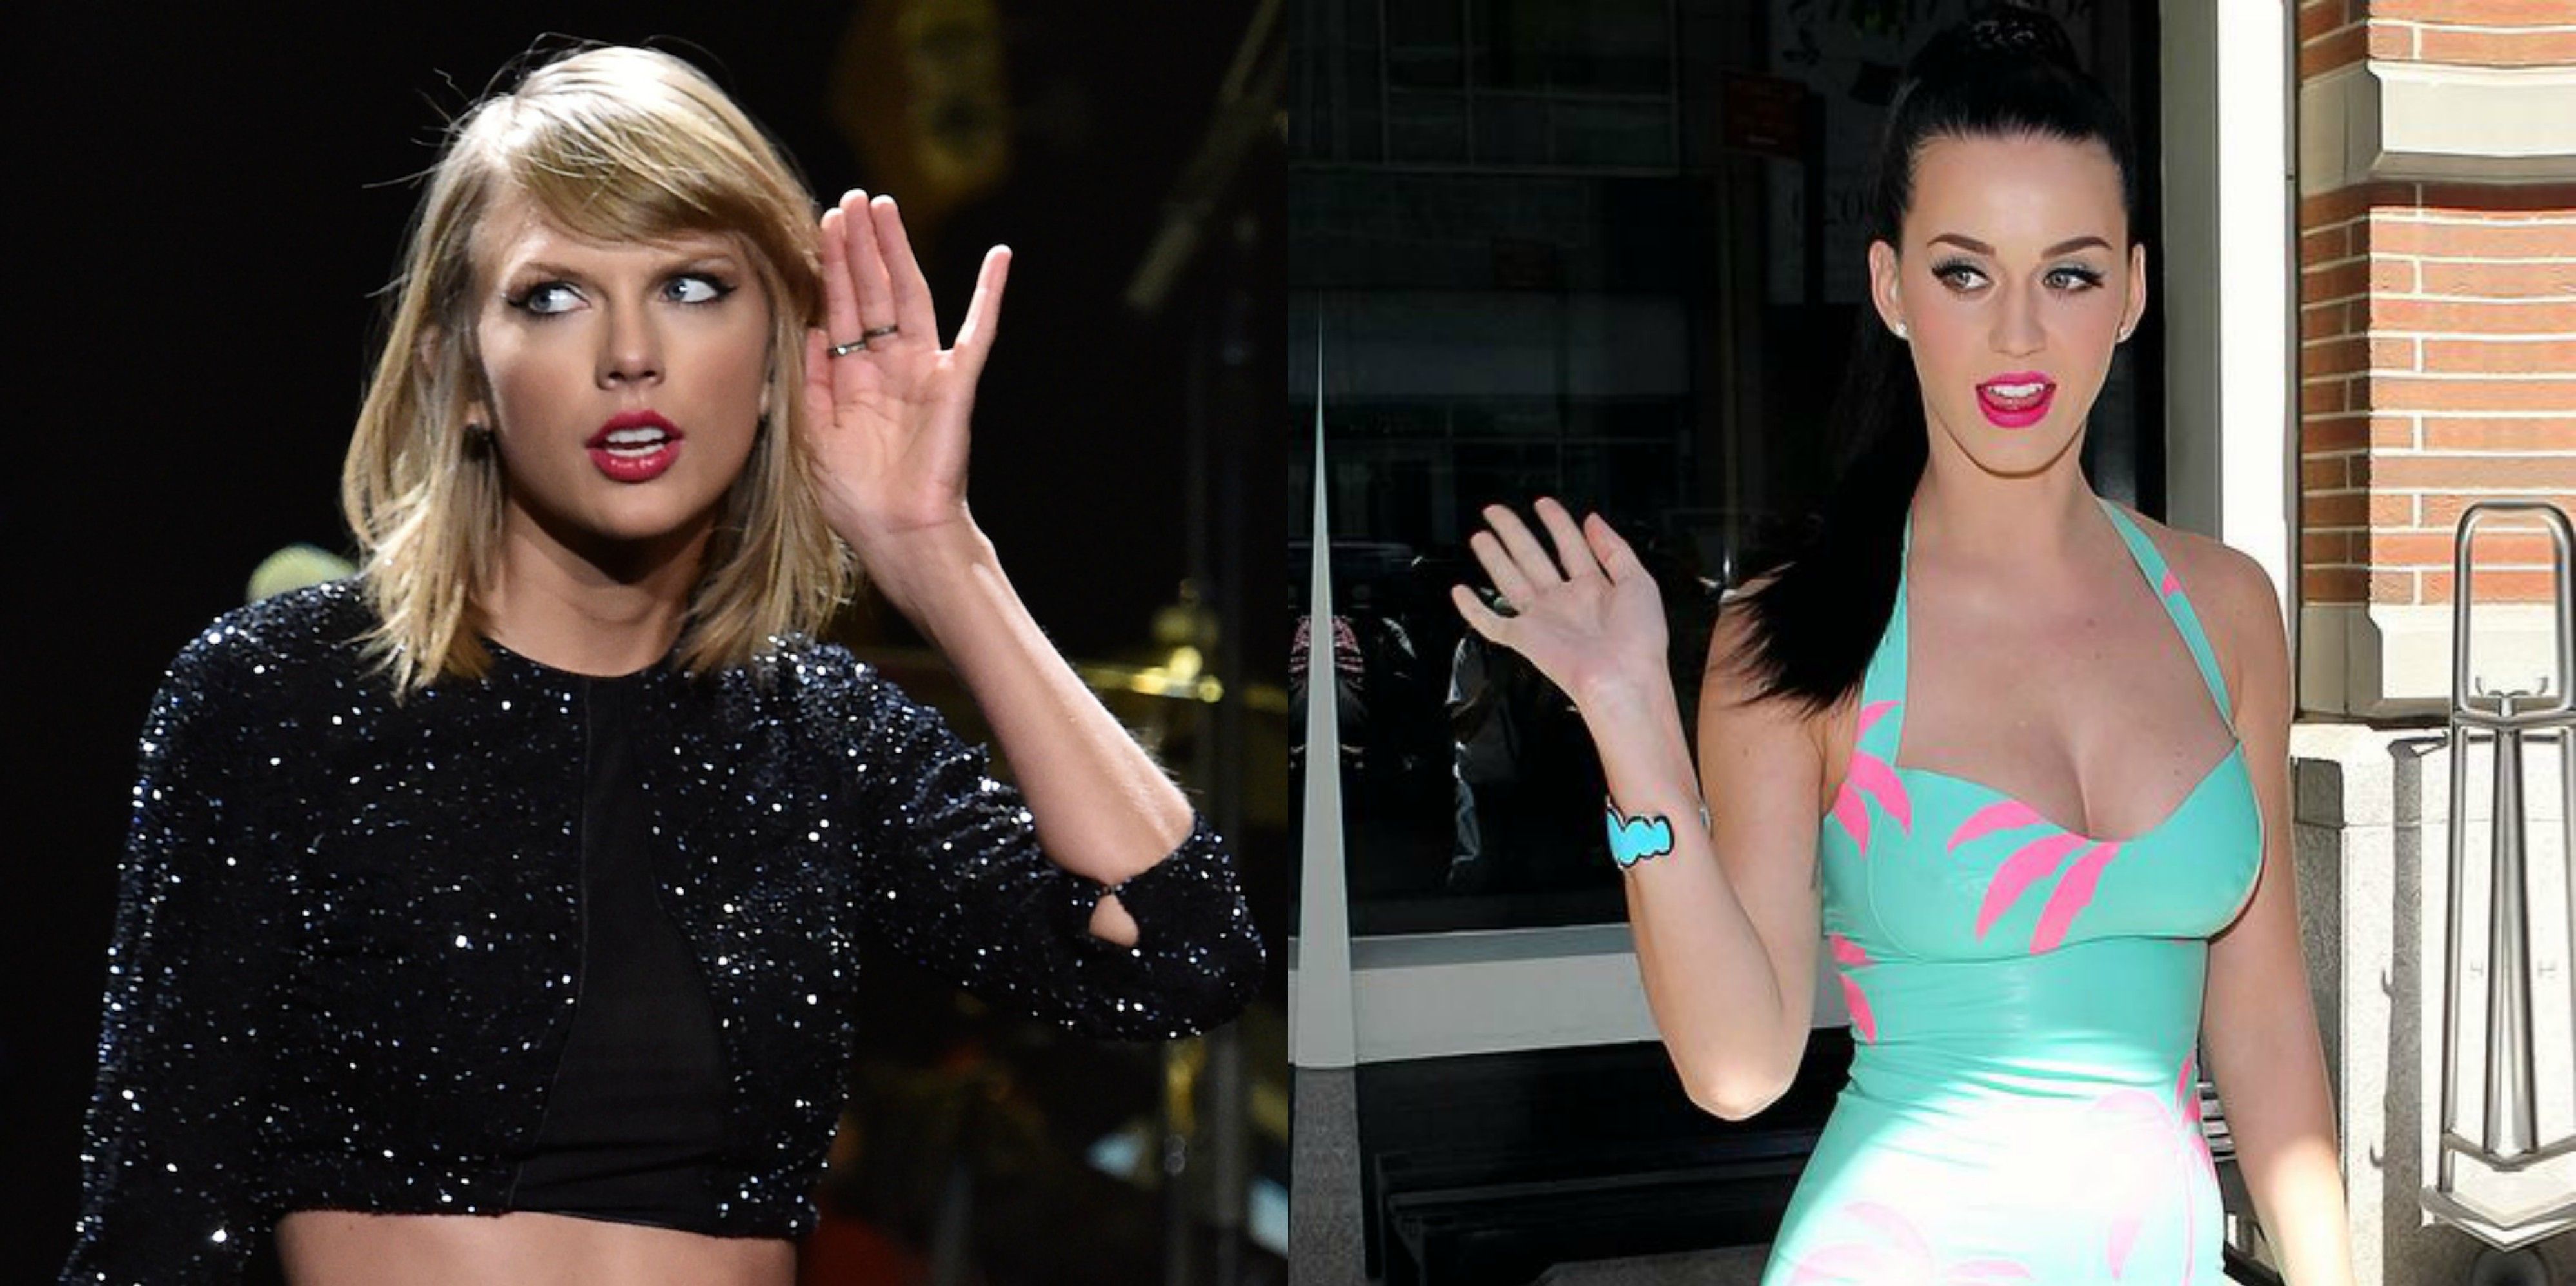 The Hottest Catfight Of The Year: Katy Perry Vs. Taylor Swift